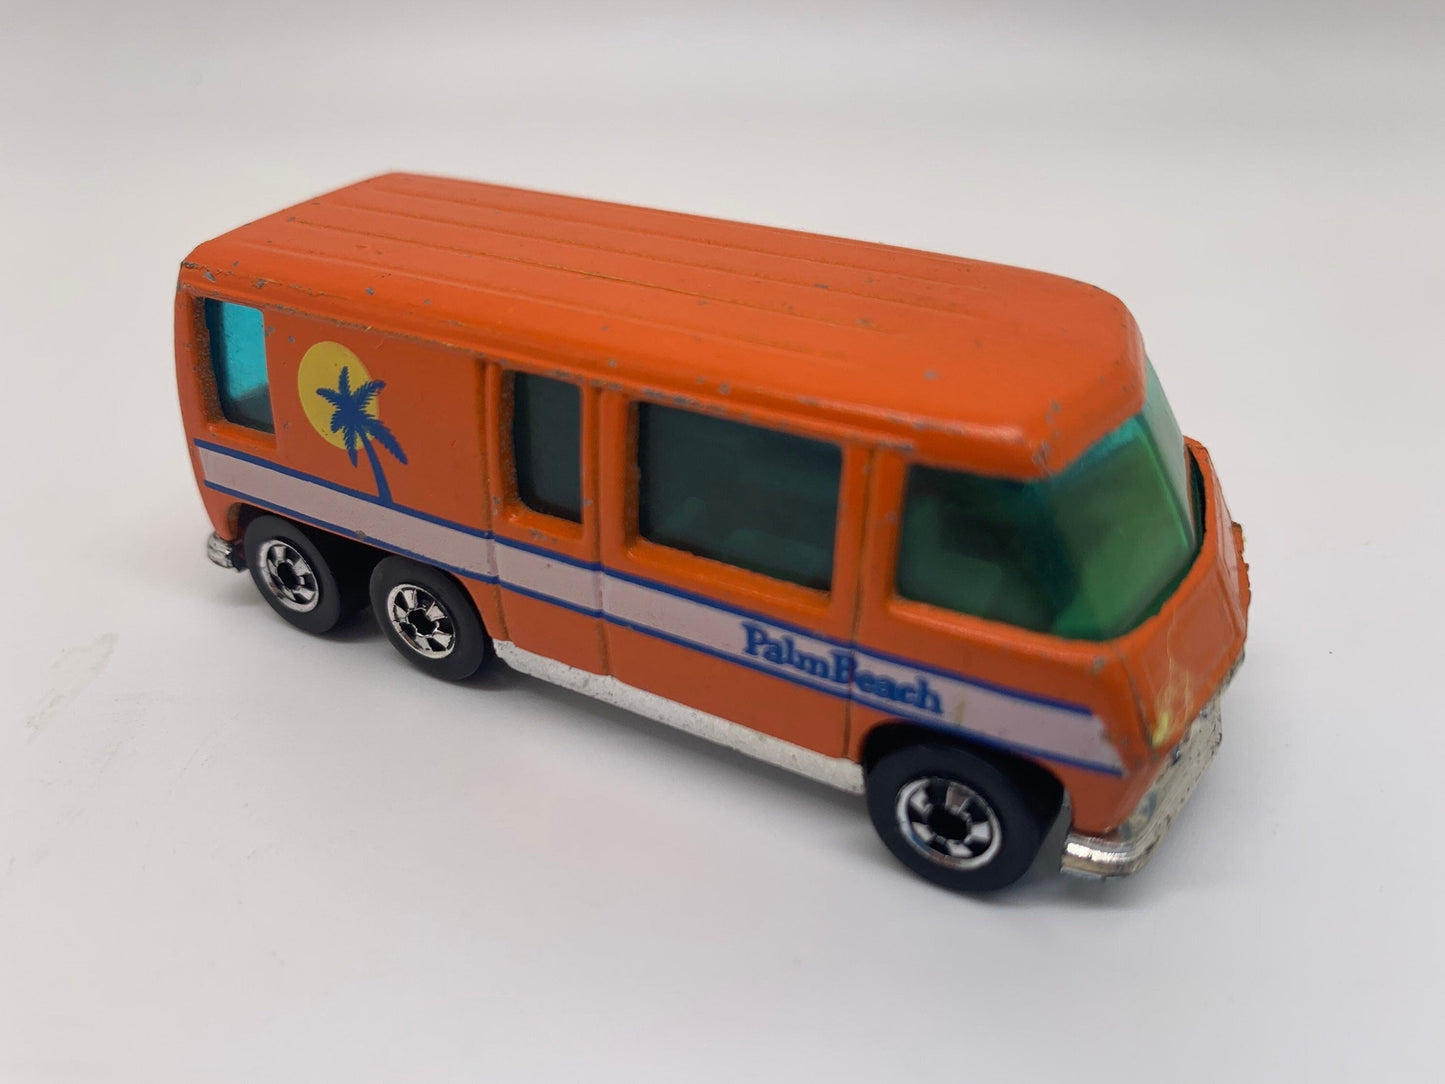 Hot Wheels GMC Motorhome Orange Mainline Collectable Scale Miniature Model Toy Car Perfect Birthday Gift